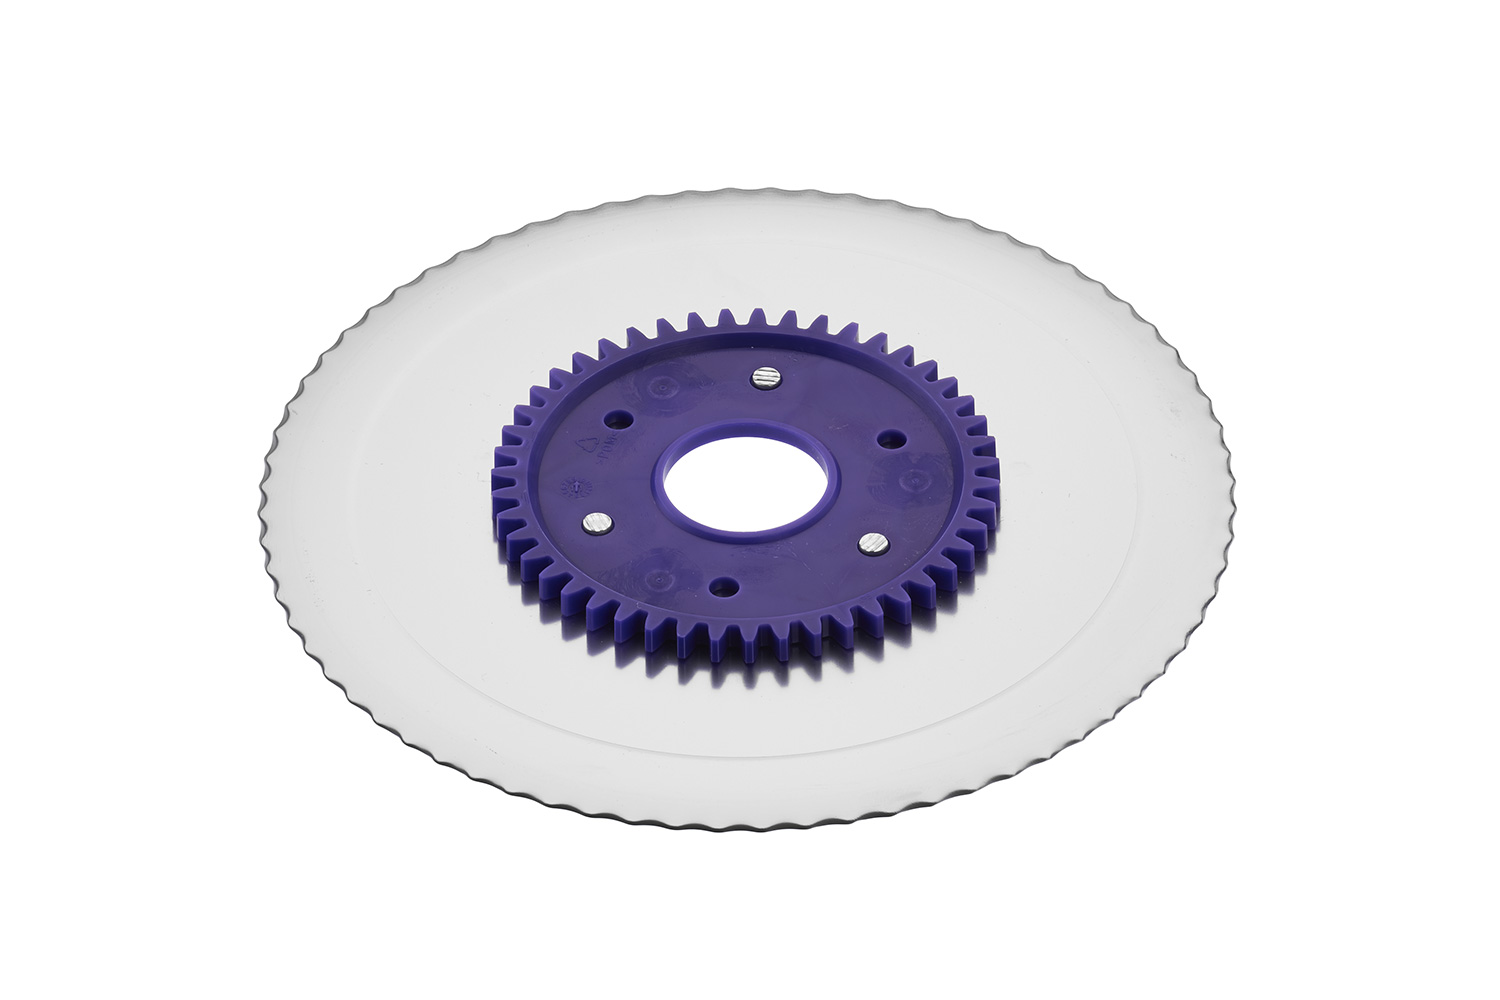 Serrated circular blade with electropolished surface and a purple gear